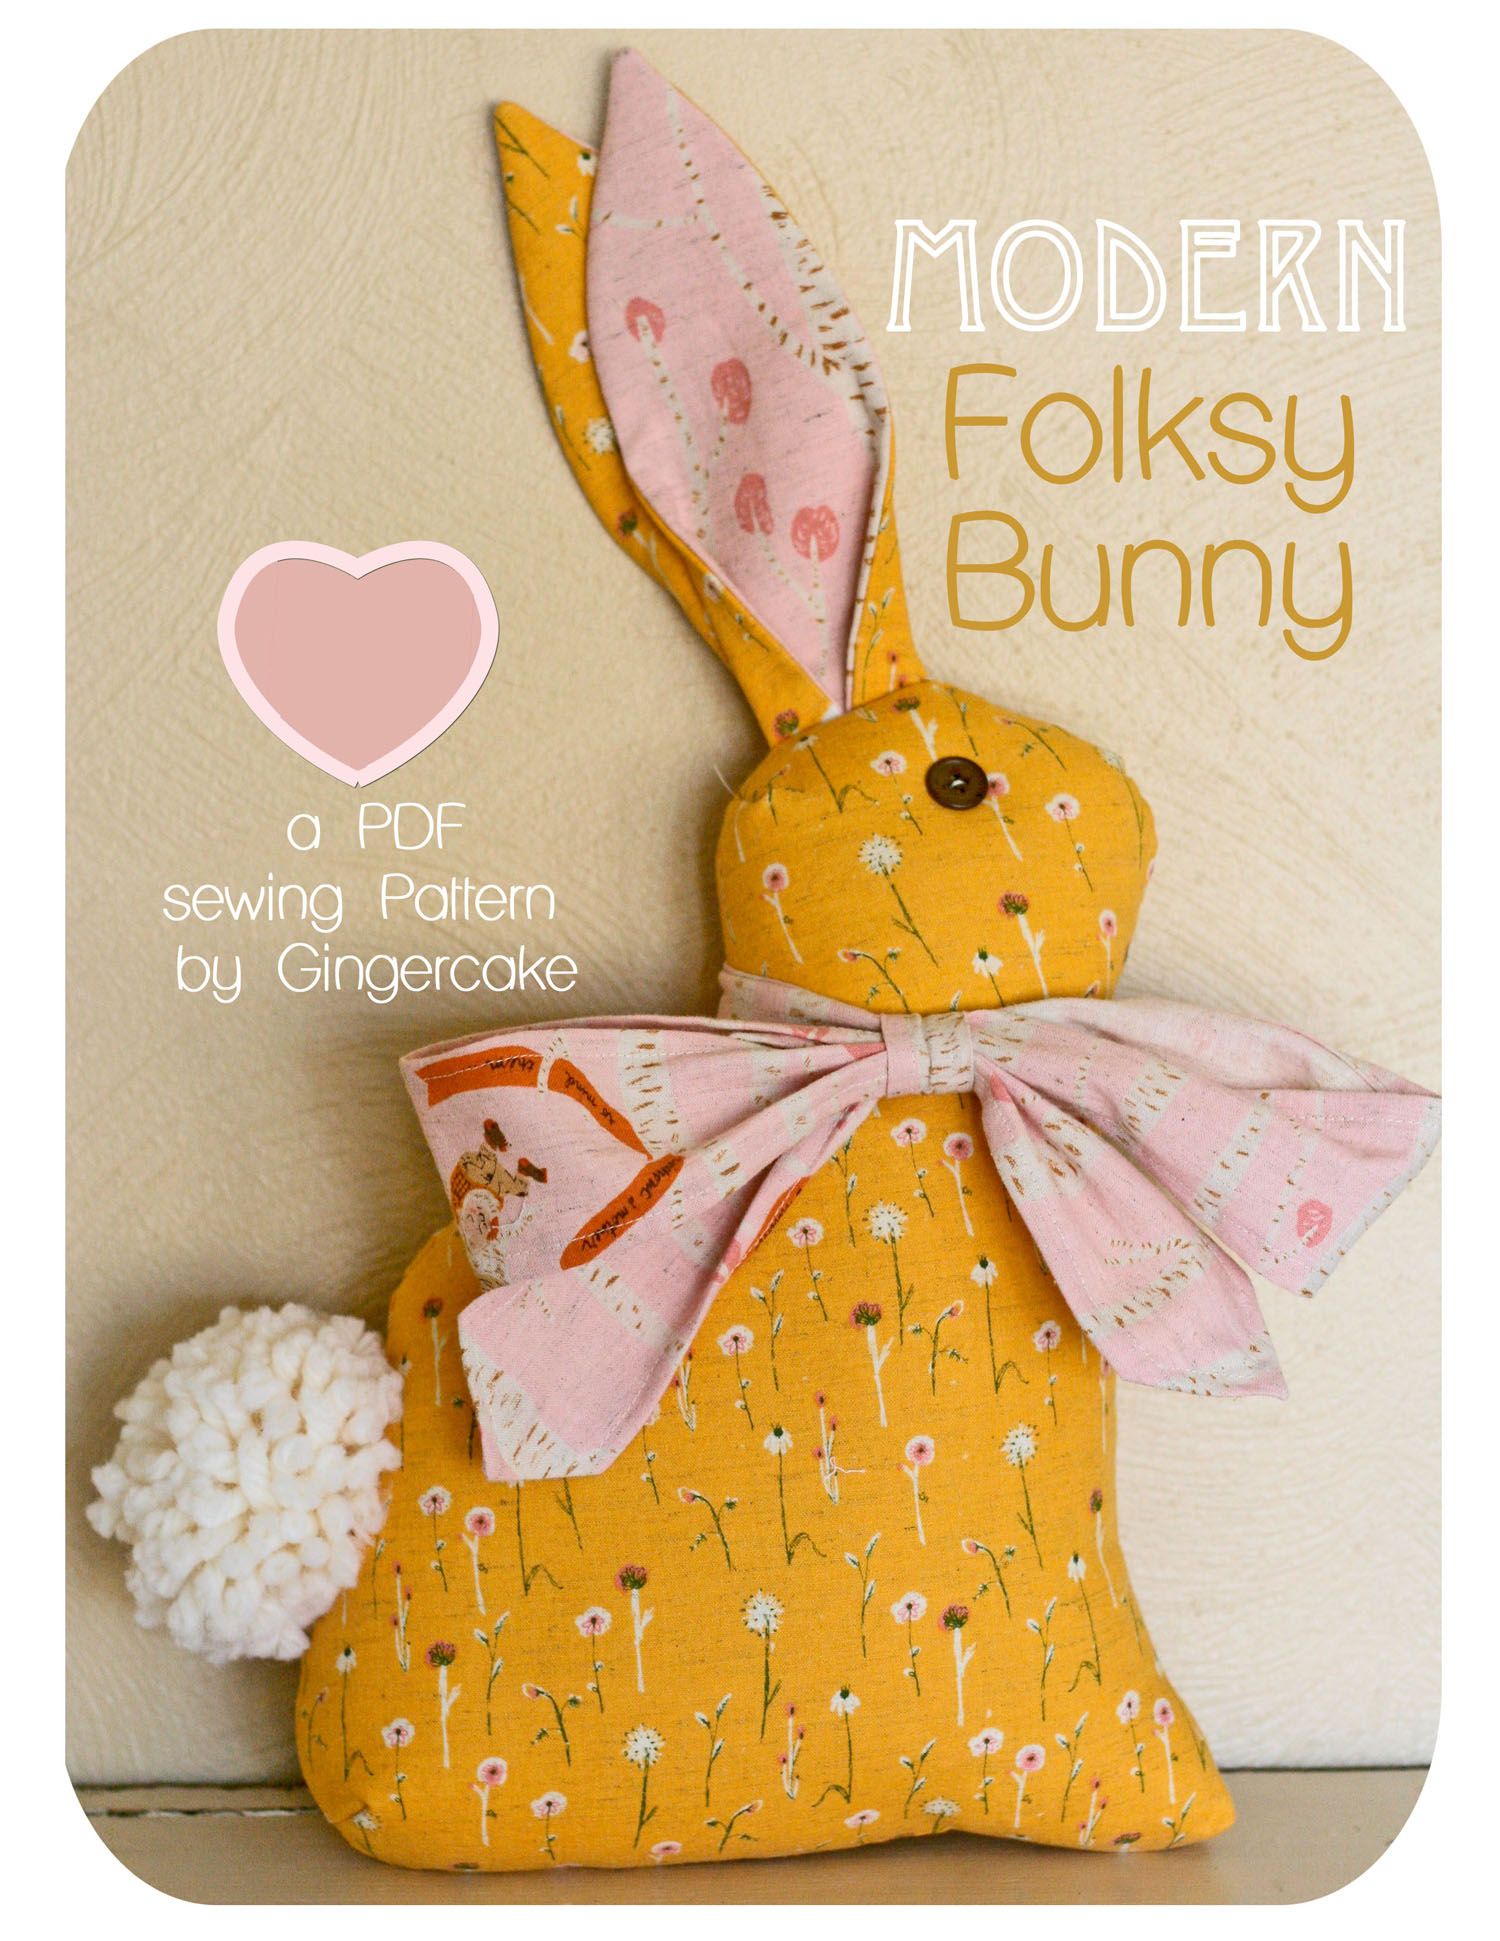 Introducing the Modern Folksy Bunny PDF Sewing Pattern Gingercake